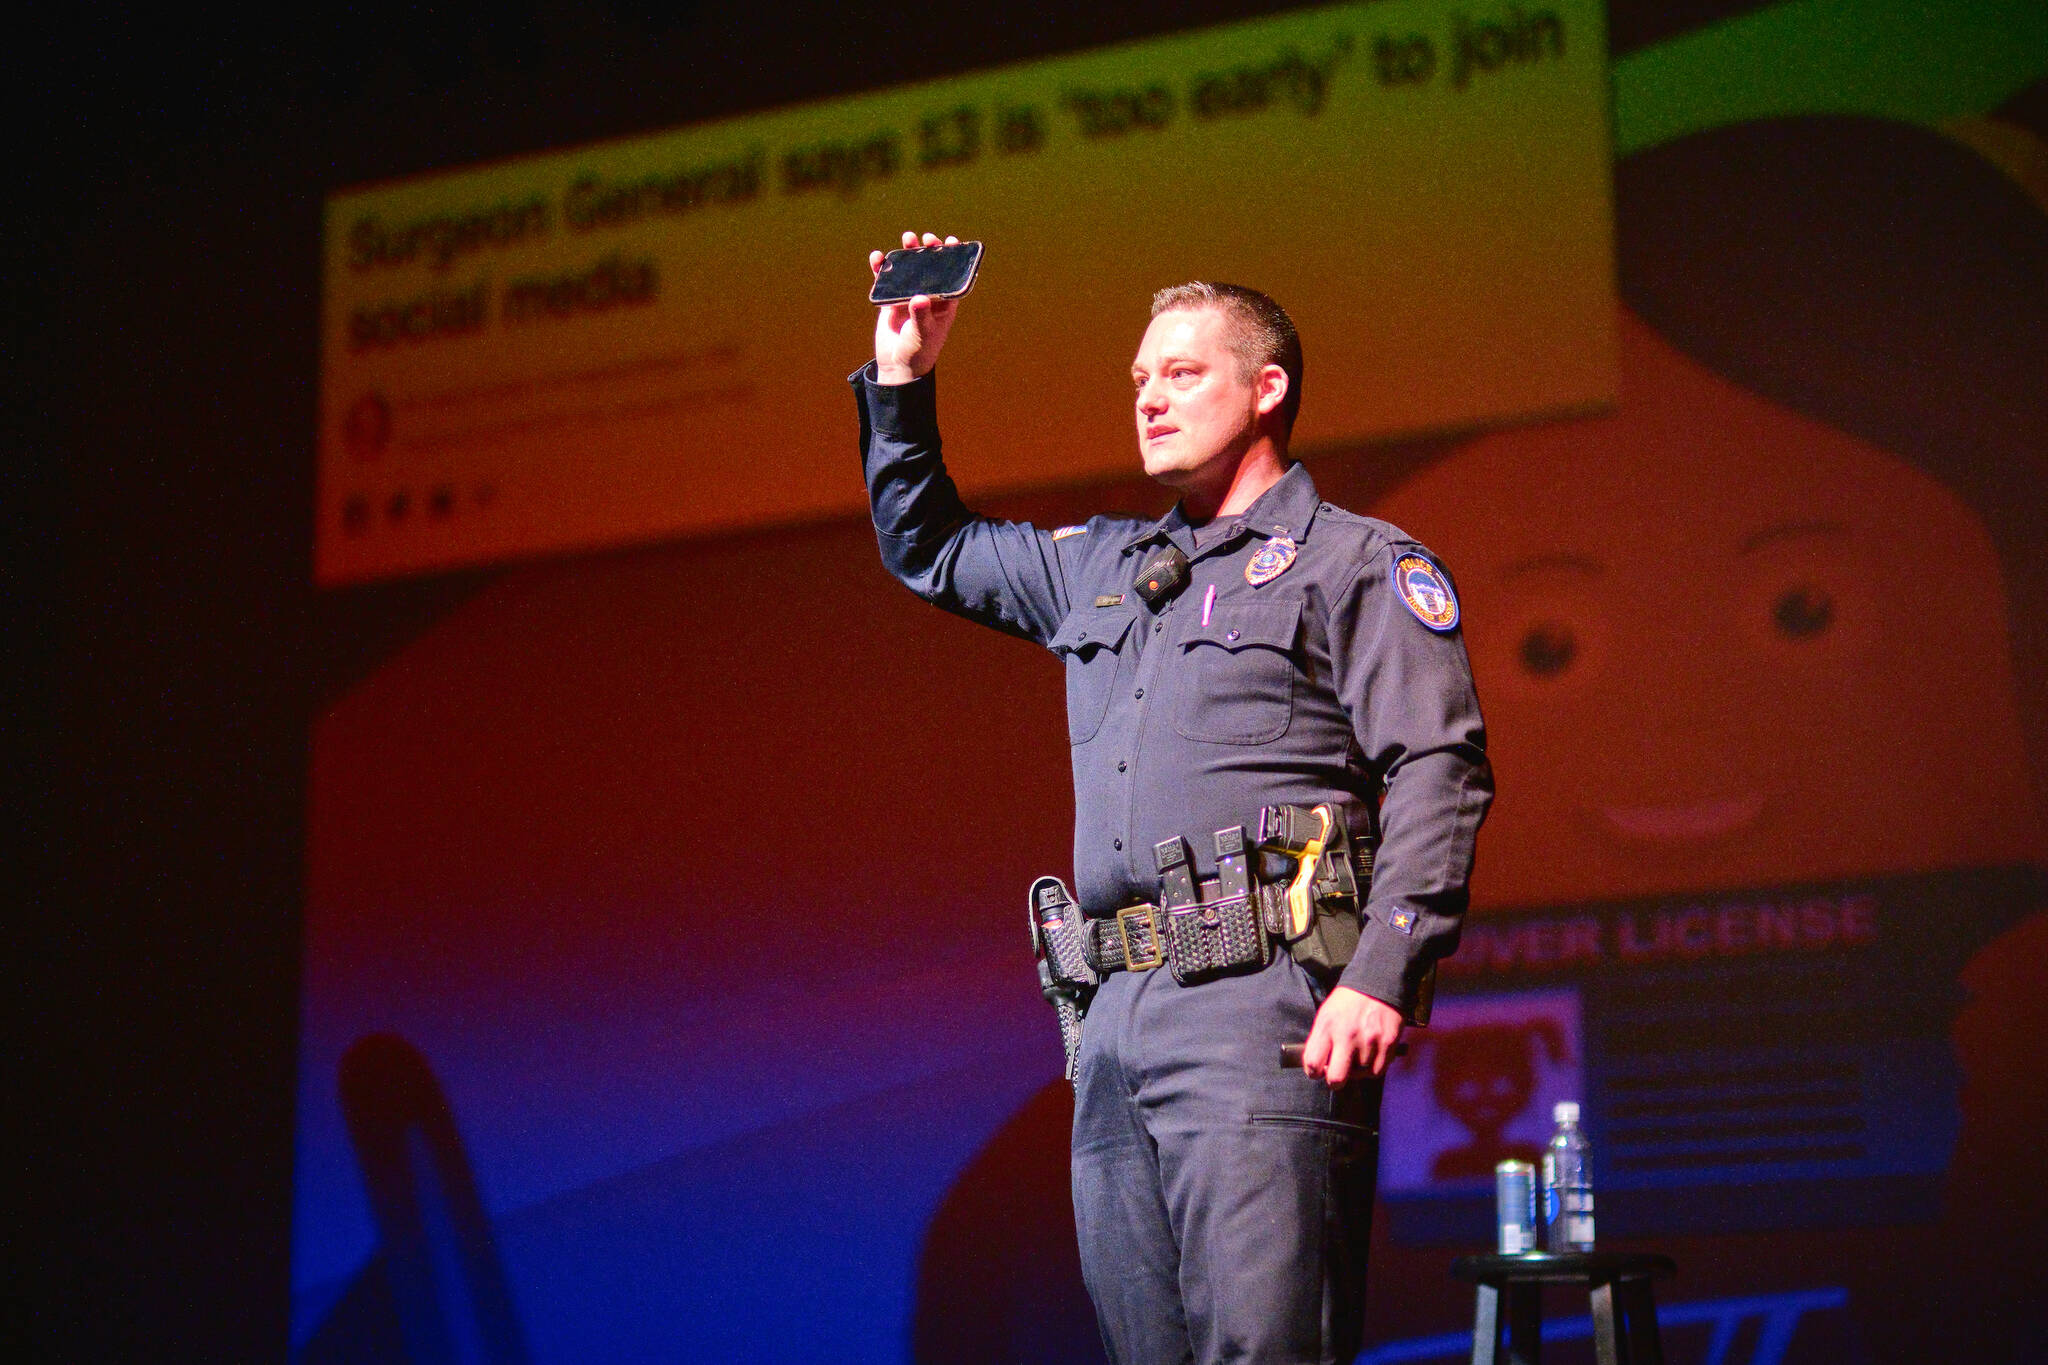 Homer Police Lt. Ryan Browning provides ‘youth and technology’ presentation Saturday Feb. 4 at Homer High School in Homer, Alaska. Photo provided by Christopher Kincaid.